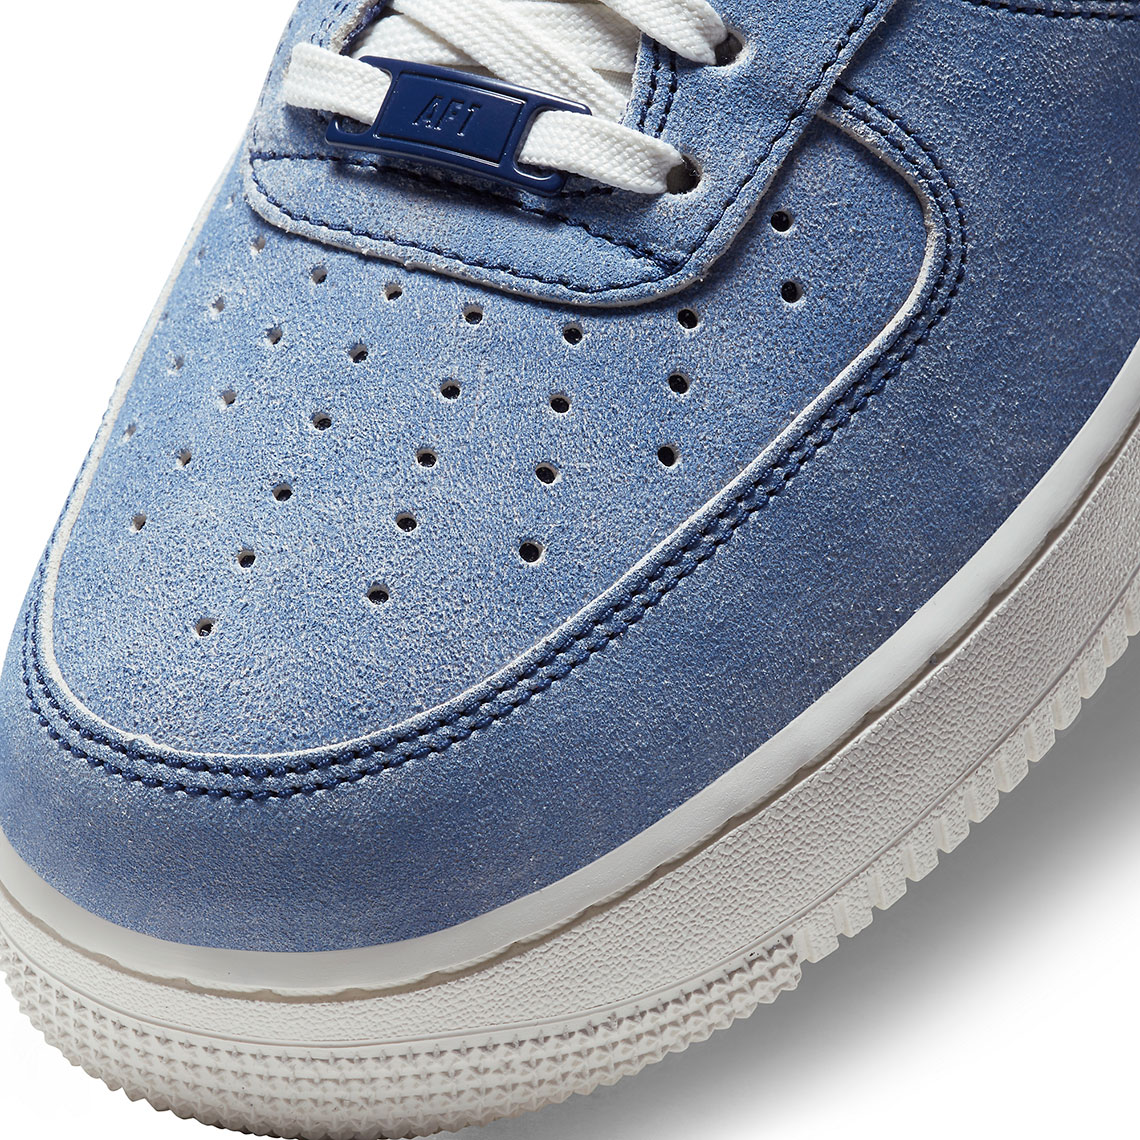 Nike Air Force 1 Low Blue Suede Dh0265 400 3